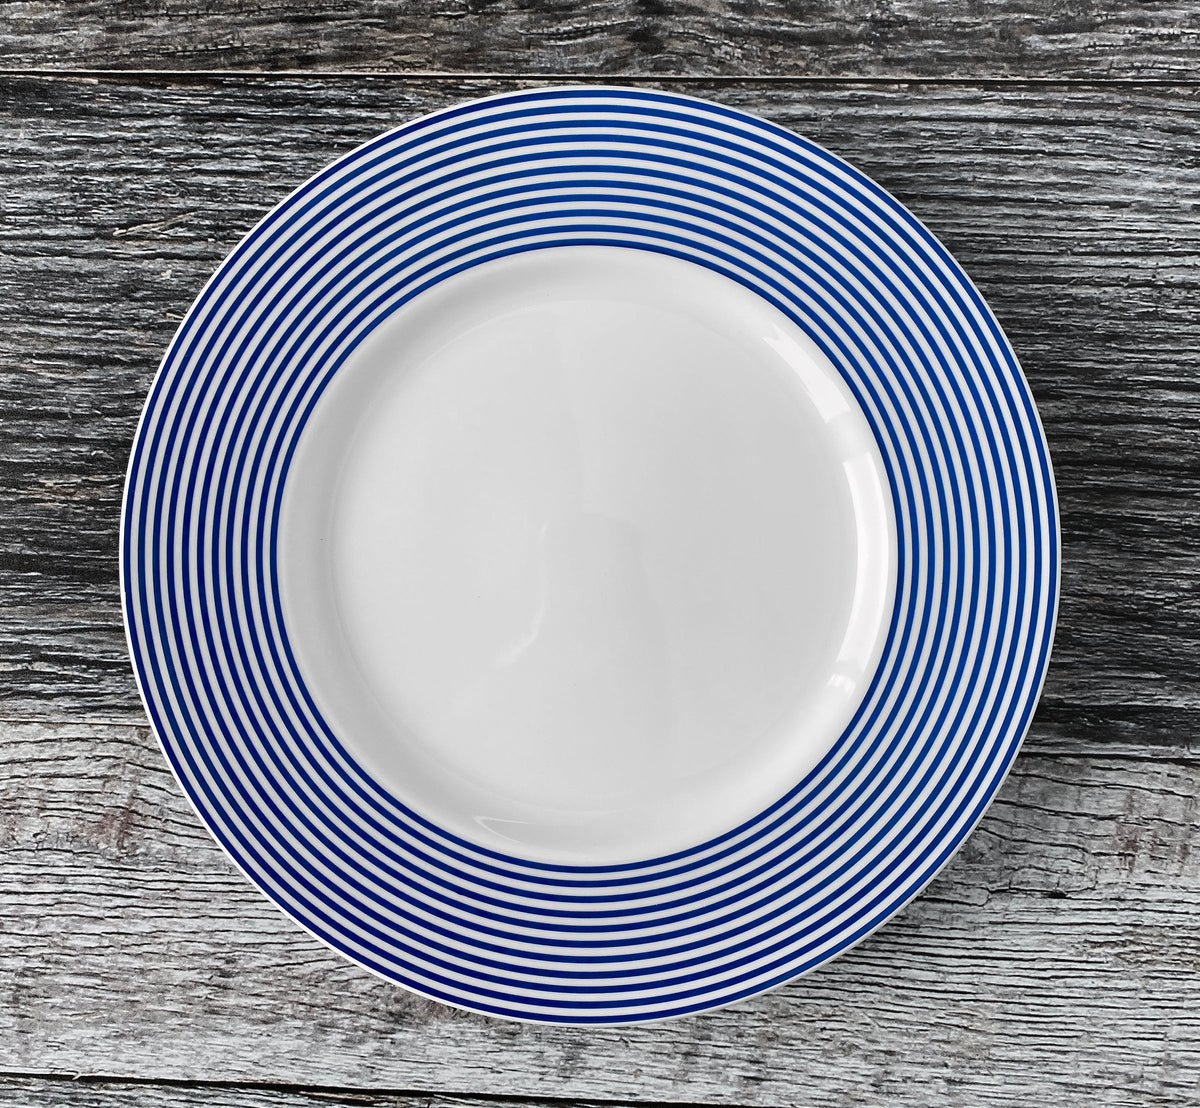 A Newport Stripe Rimmed Salad Plate from Caskata Artisanal Home, with multiple blue concentric circles around its edge, resembling the classic Newport Stripe, is placed on a weathered wooden surface.